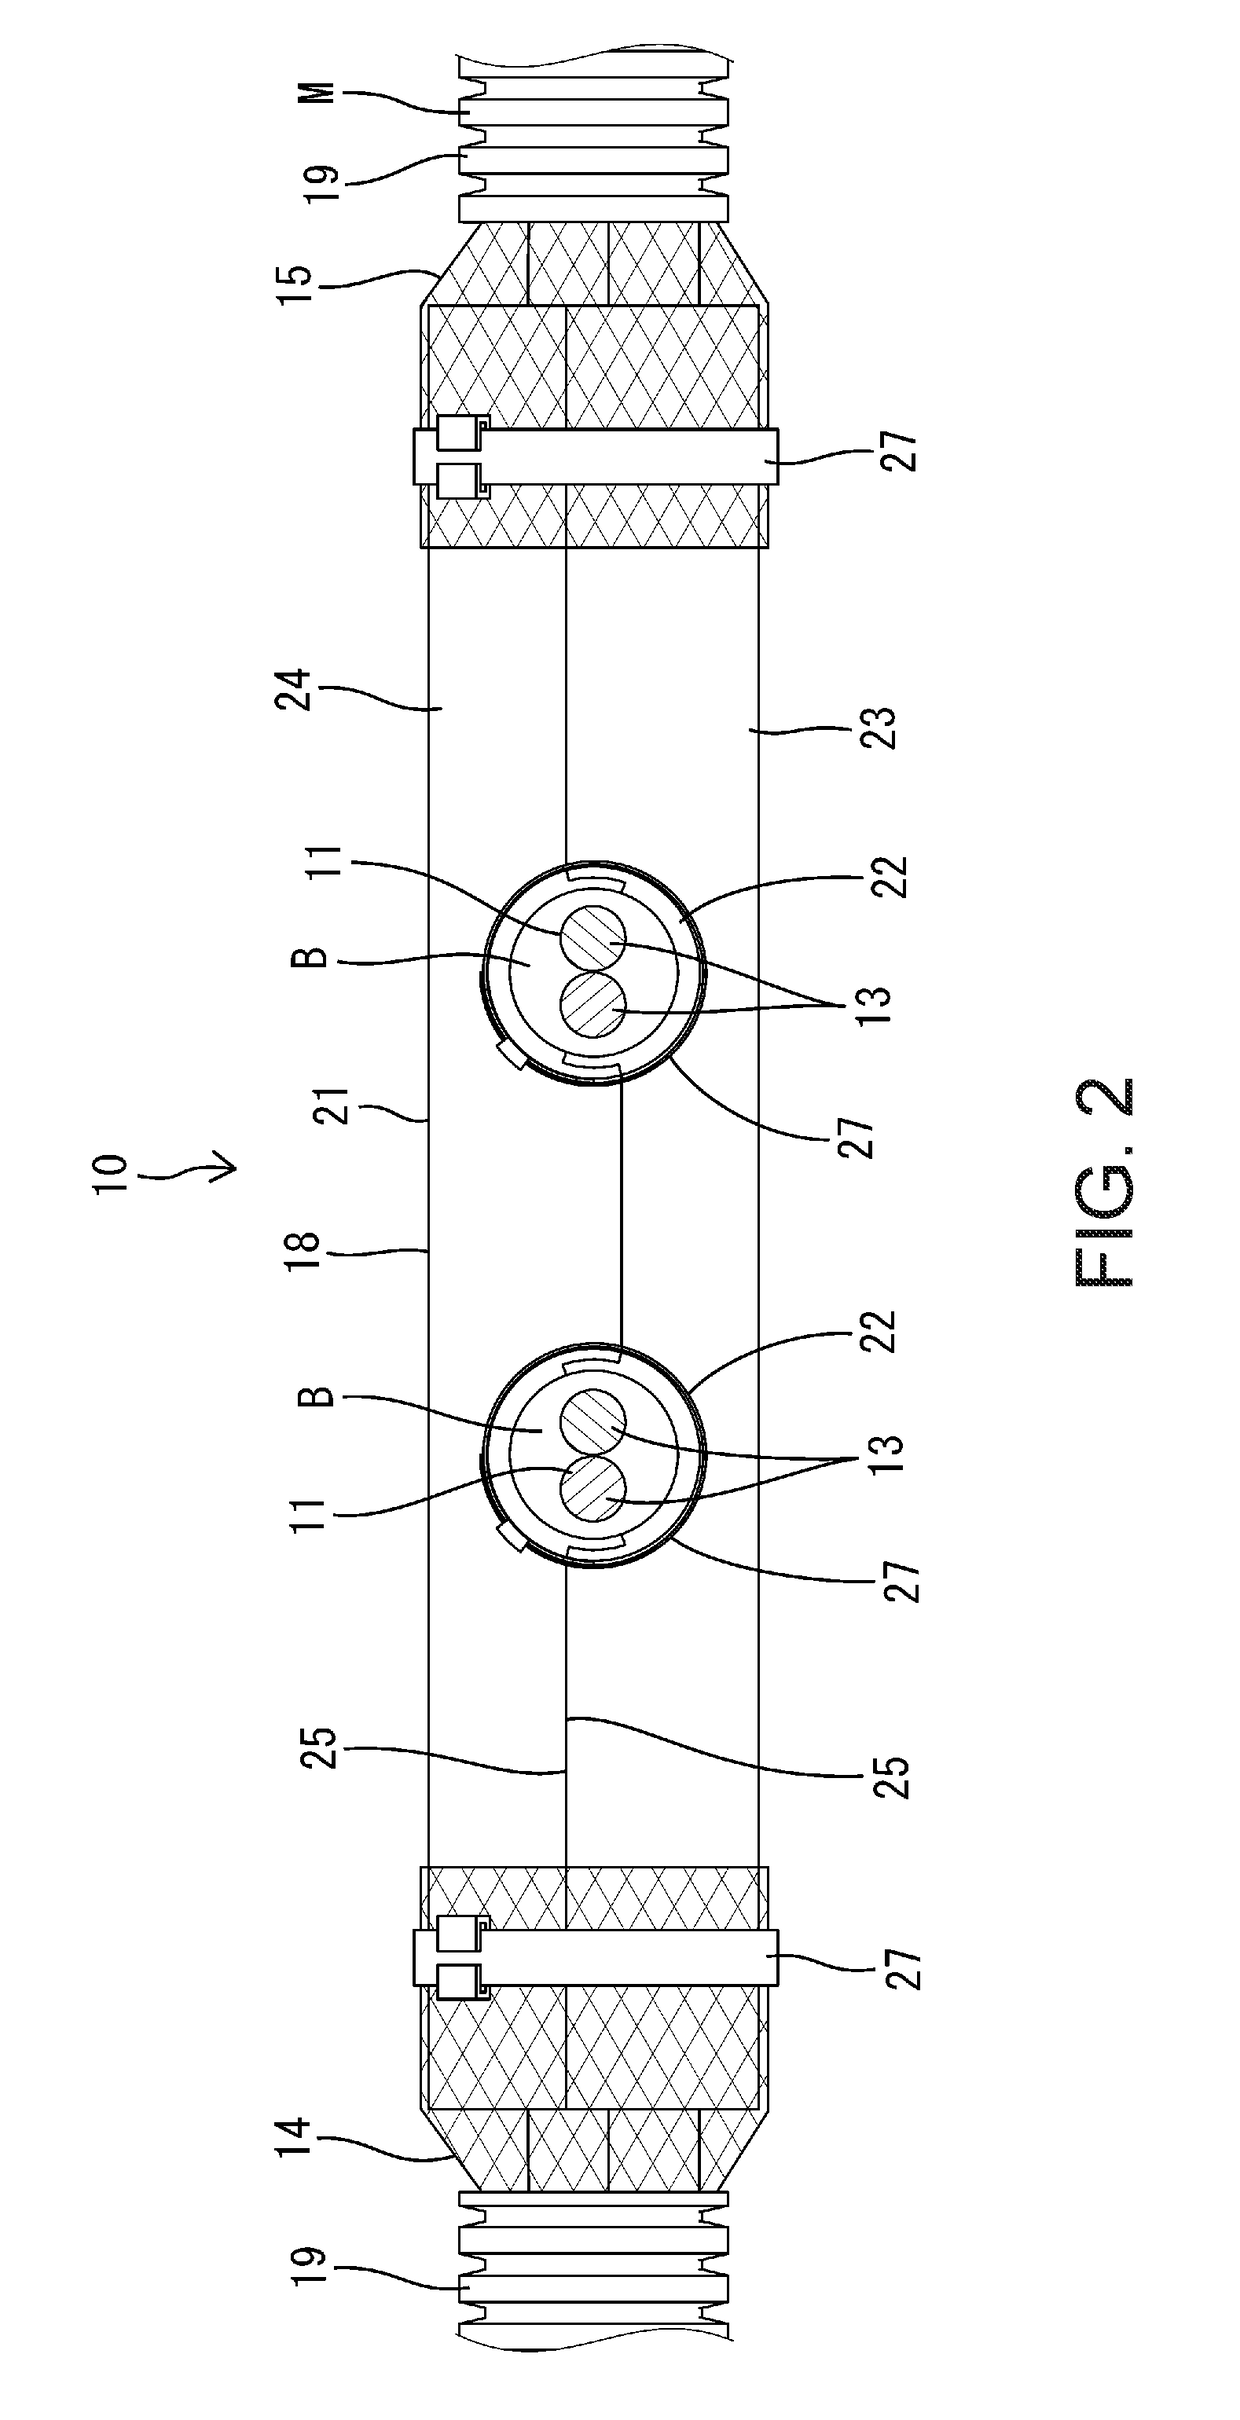 Shielded conductive path and relay connecting member